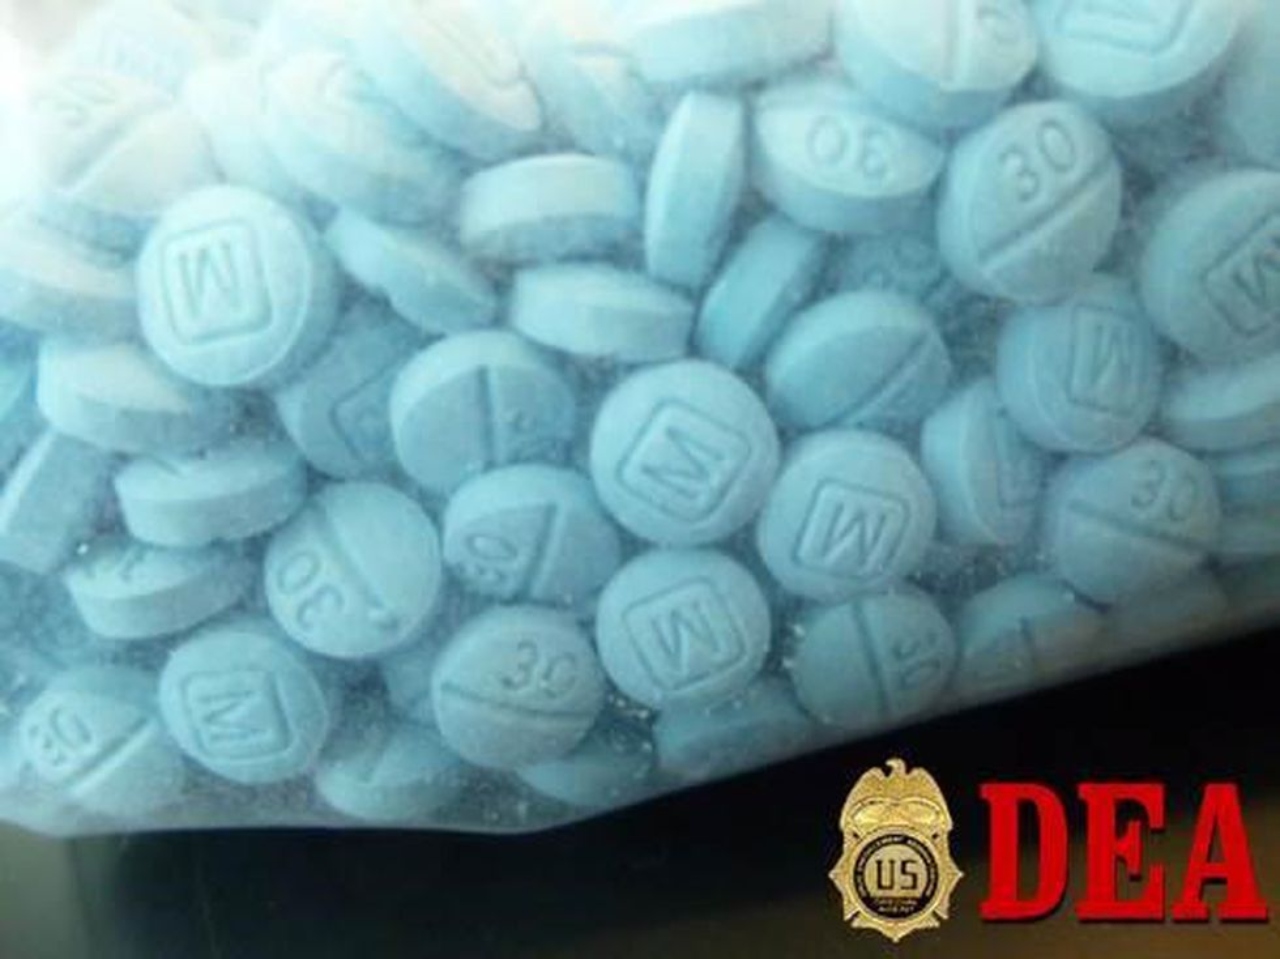 A 13-year-old male student at Chipman Junior High School brought 150 fentanyl pills to school with the intent to sell.